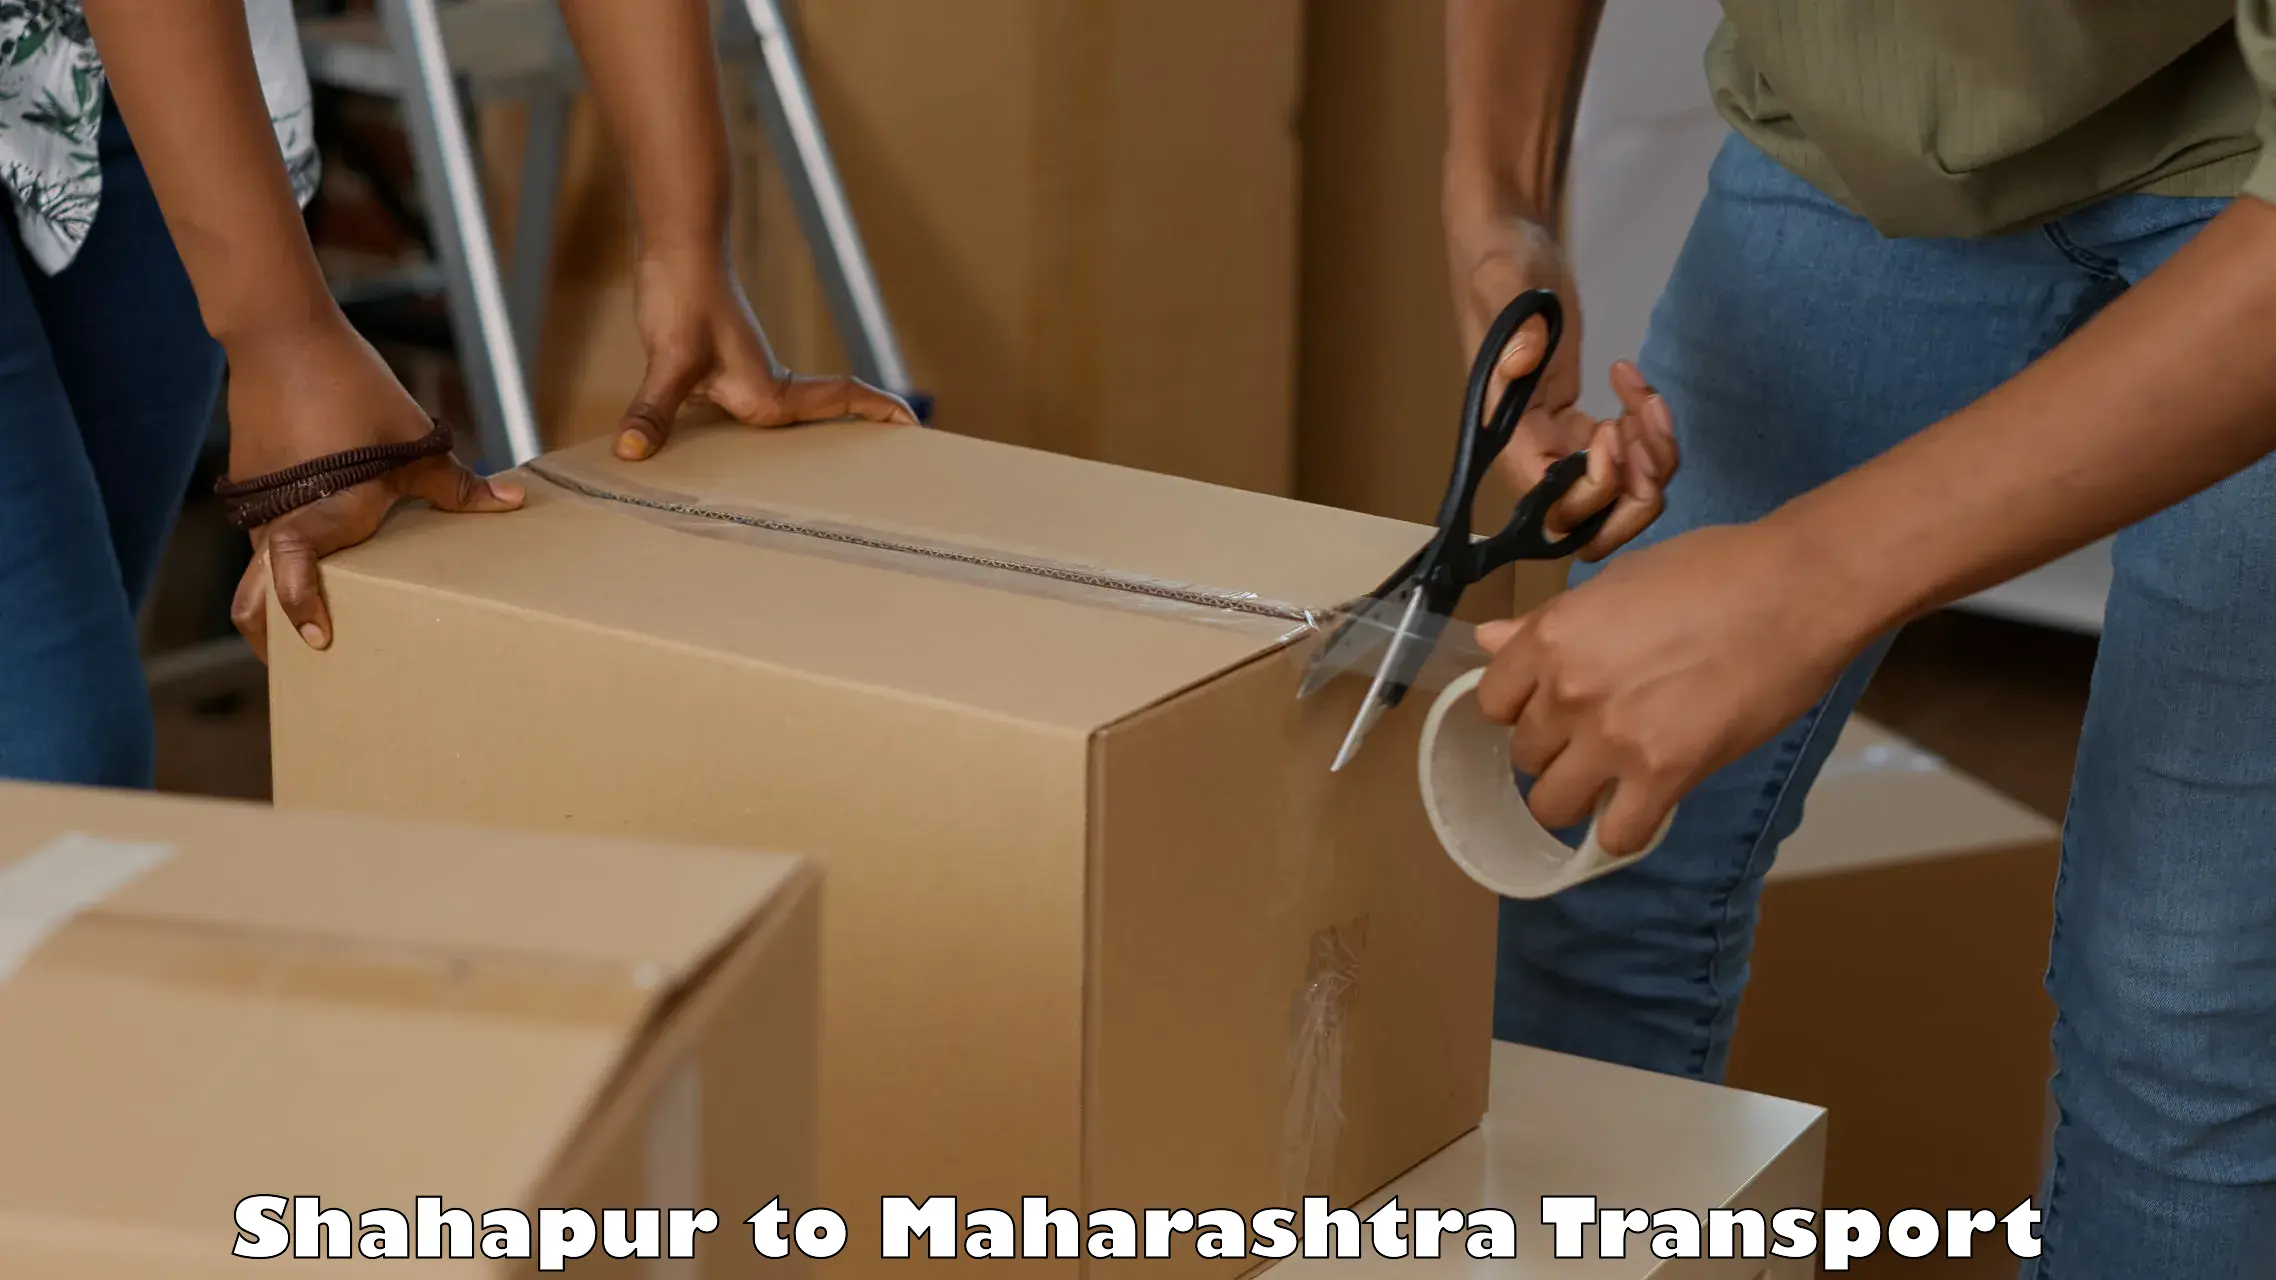 Truck transport companies in India in Shahapur to DY Patil Vidyapeeth Pune